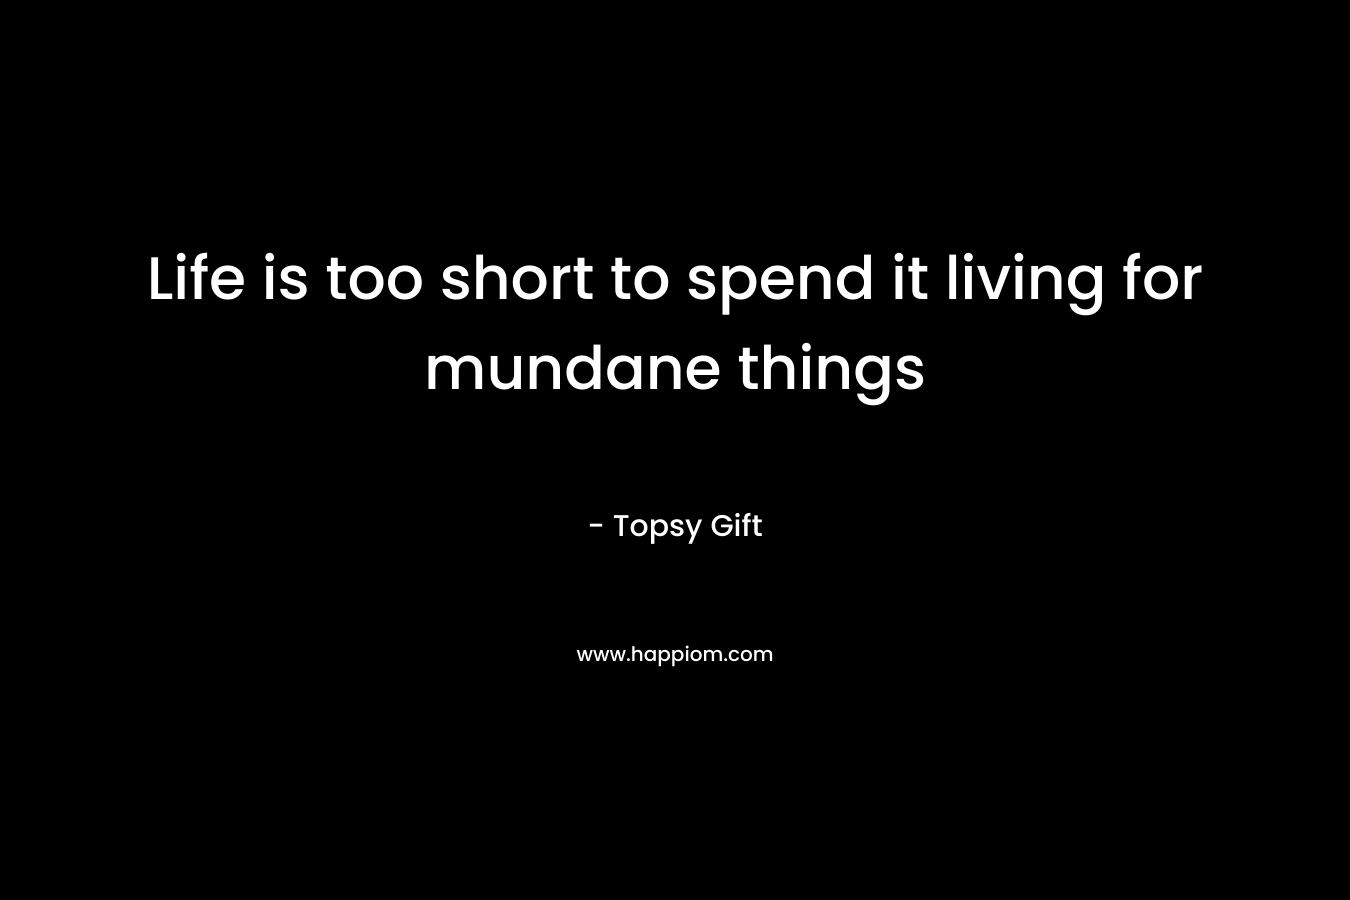 Life is too short to spend it living for mundane things